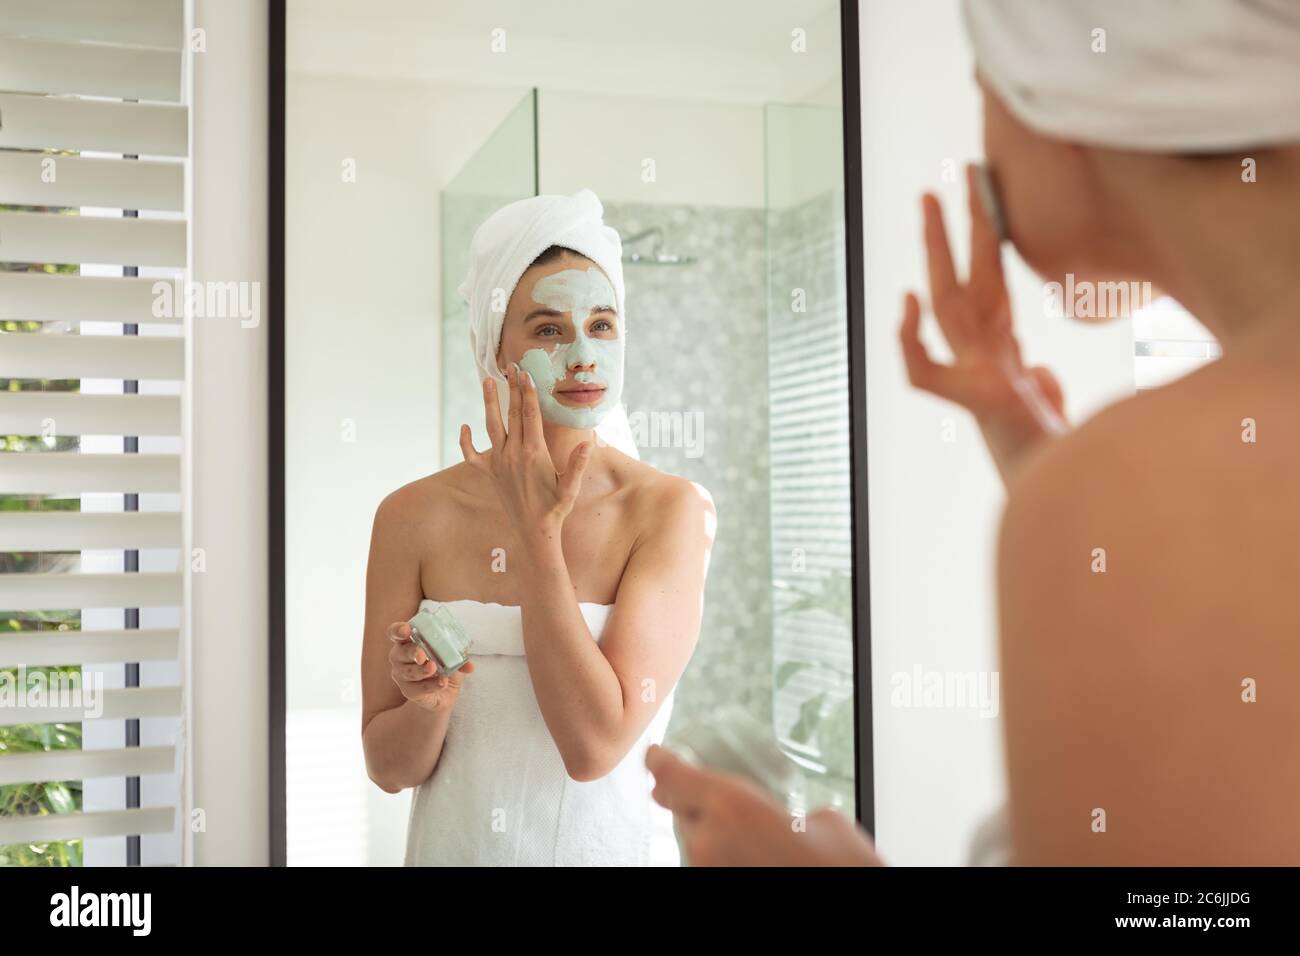 Woman applying face pack while looking in the mirror Stock Photo